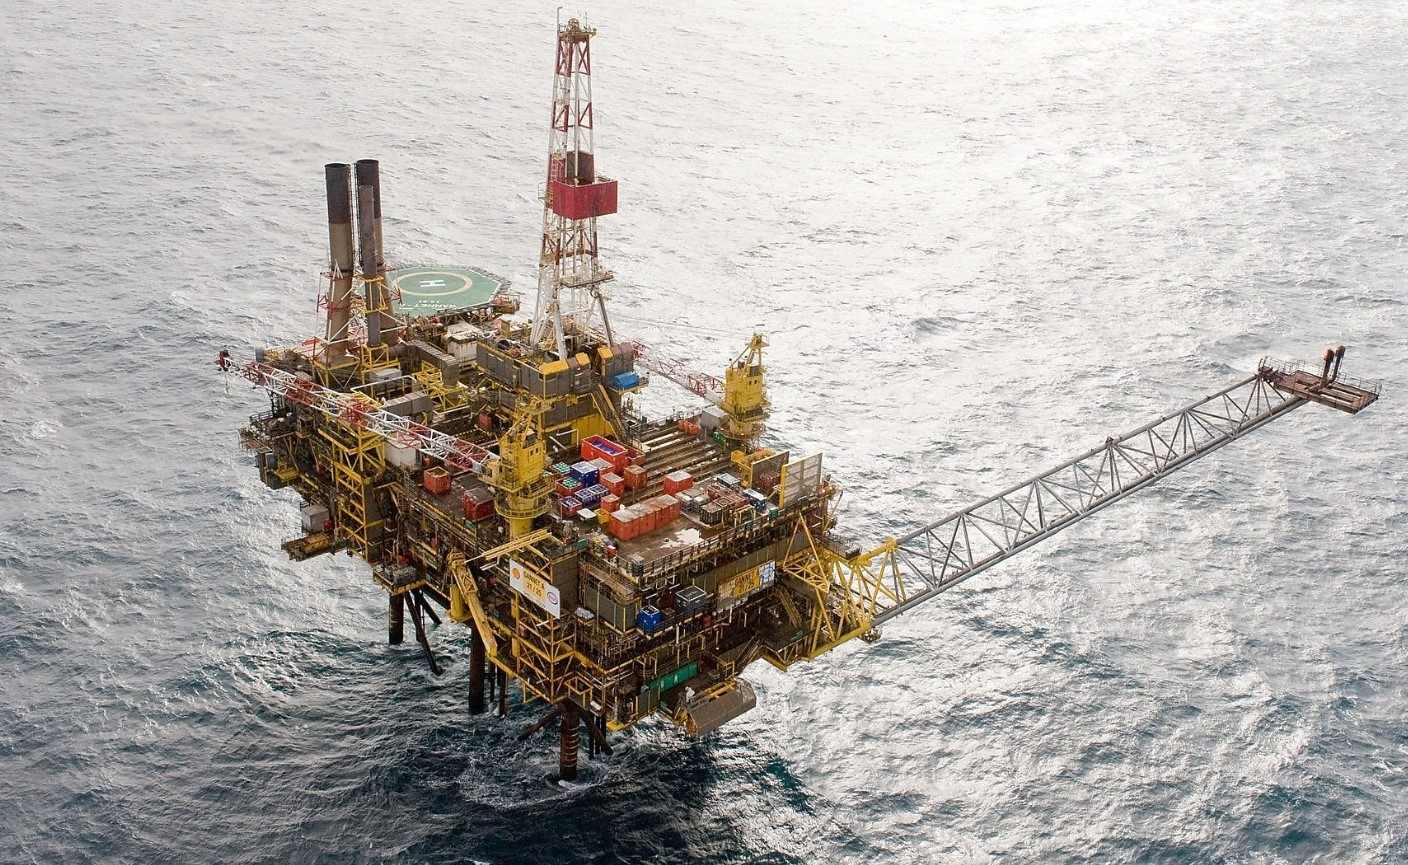 The potential deal between NEO Energy and Exxon includes Gannet field in the North Sea